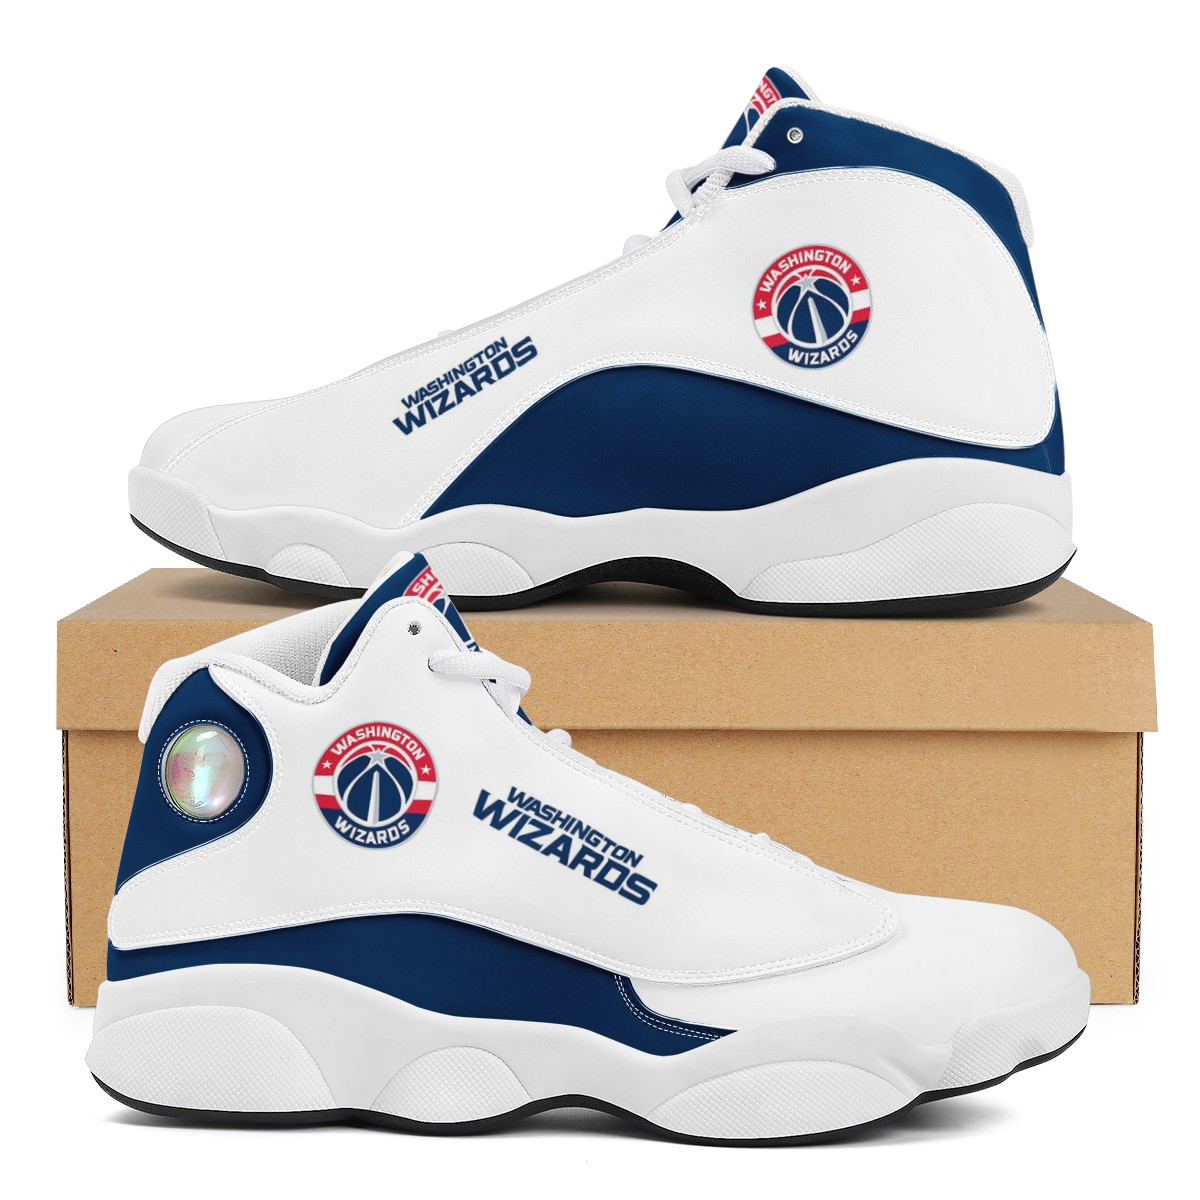 Men's Washington Wizards Limited Edition JD13 Sneakers 001